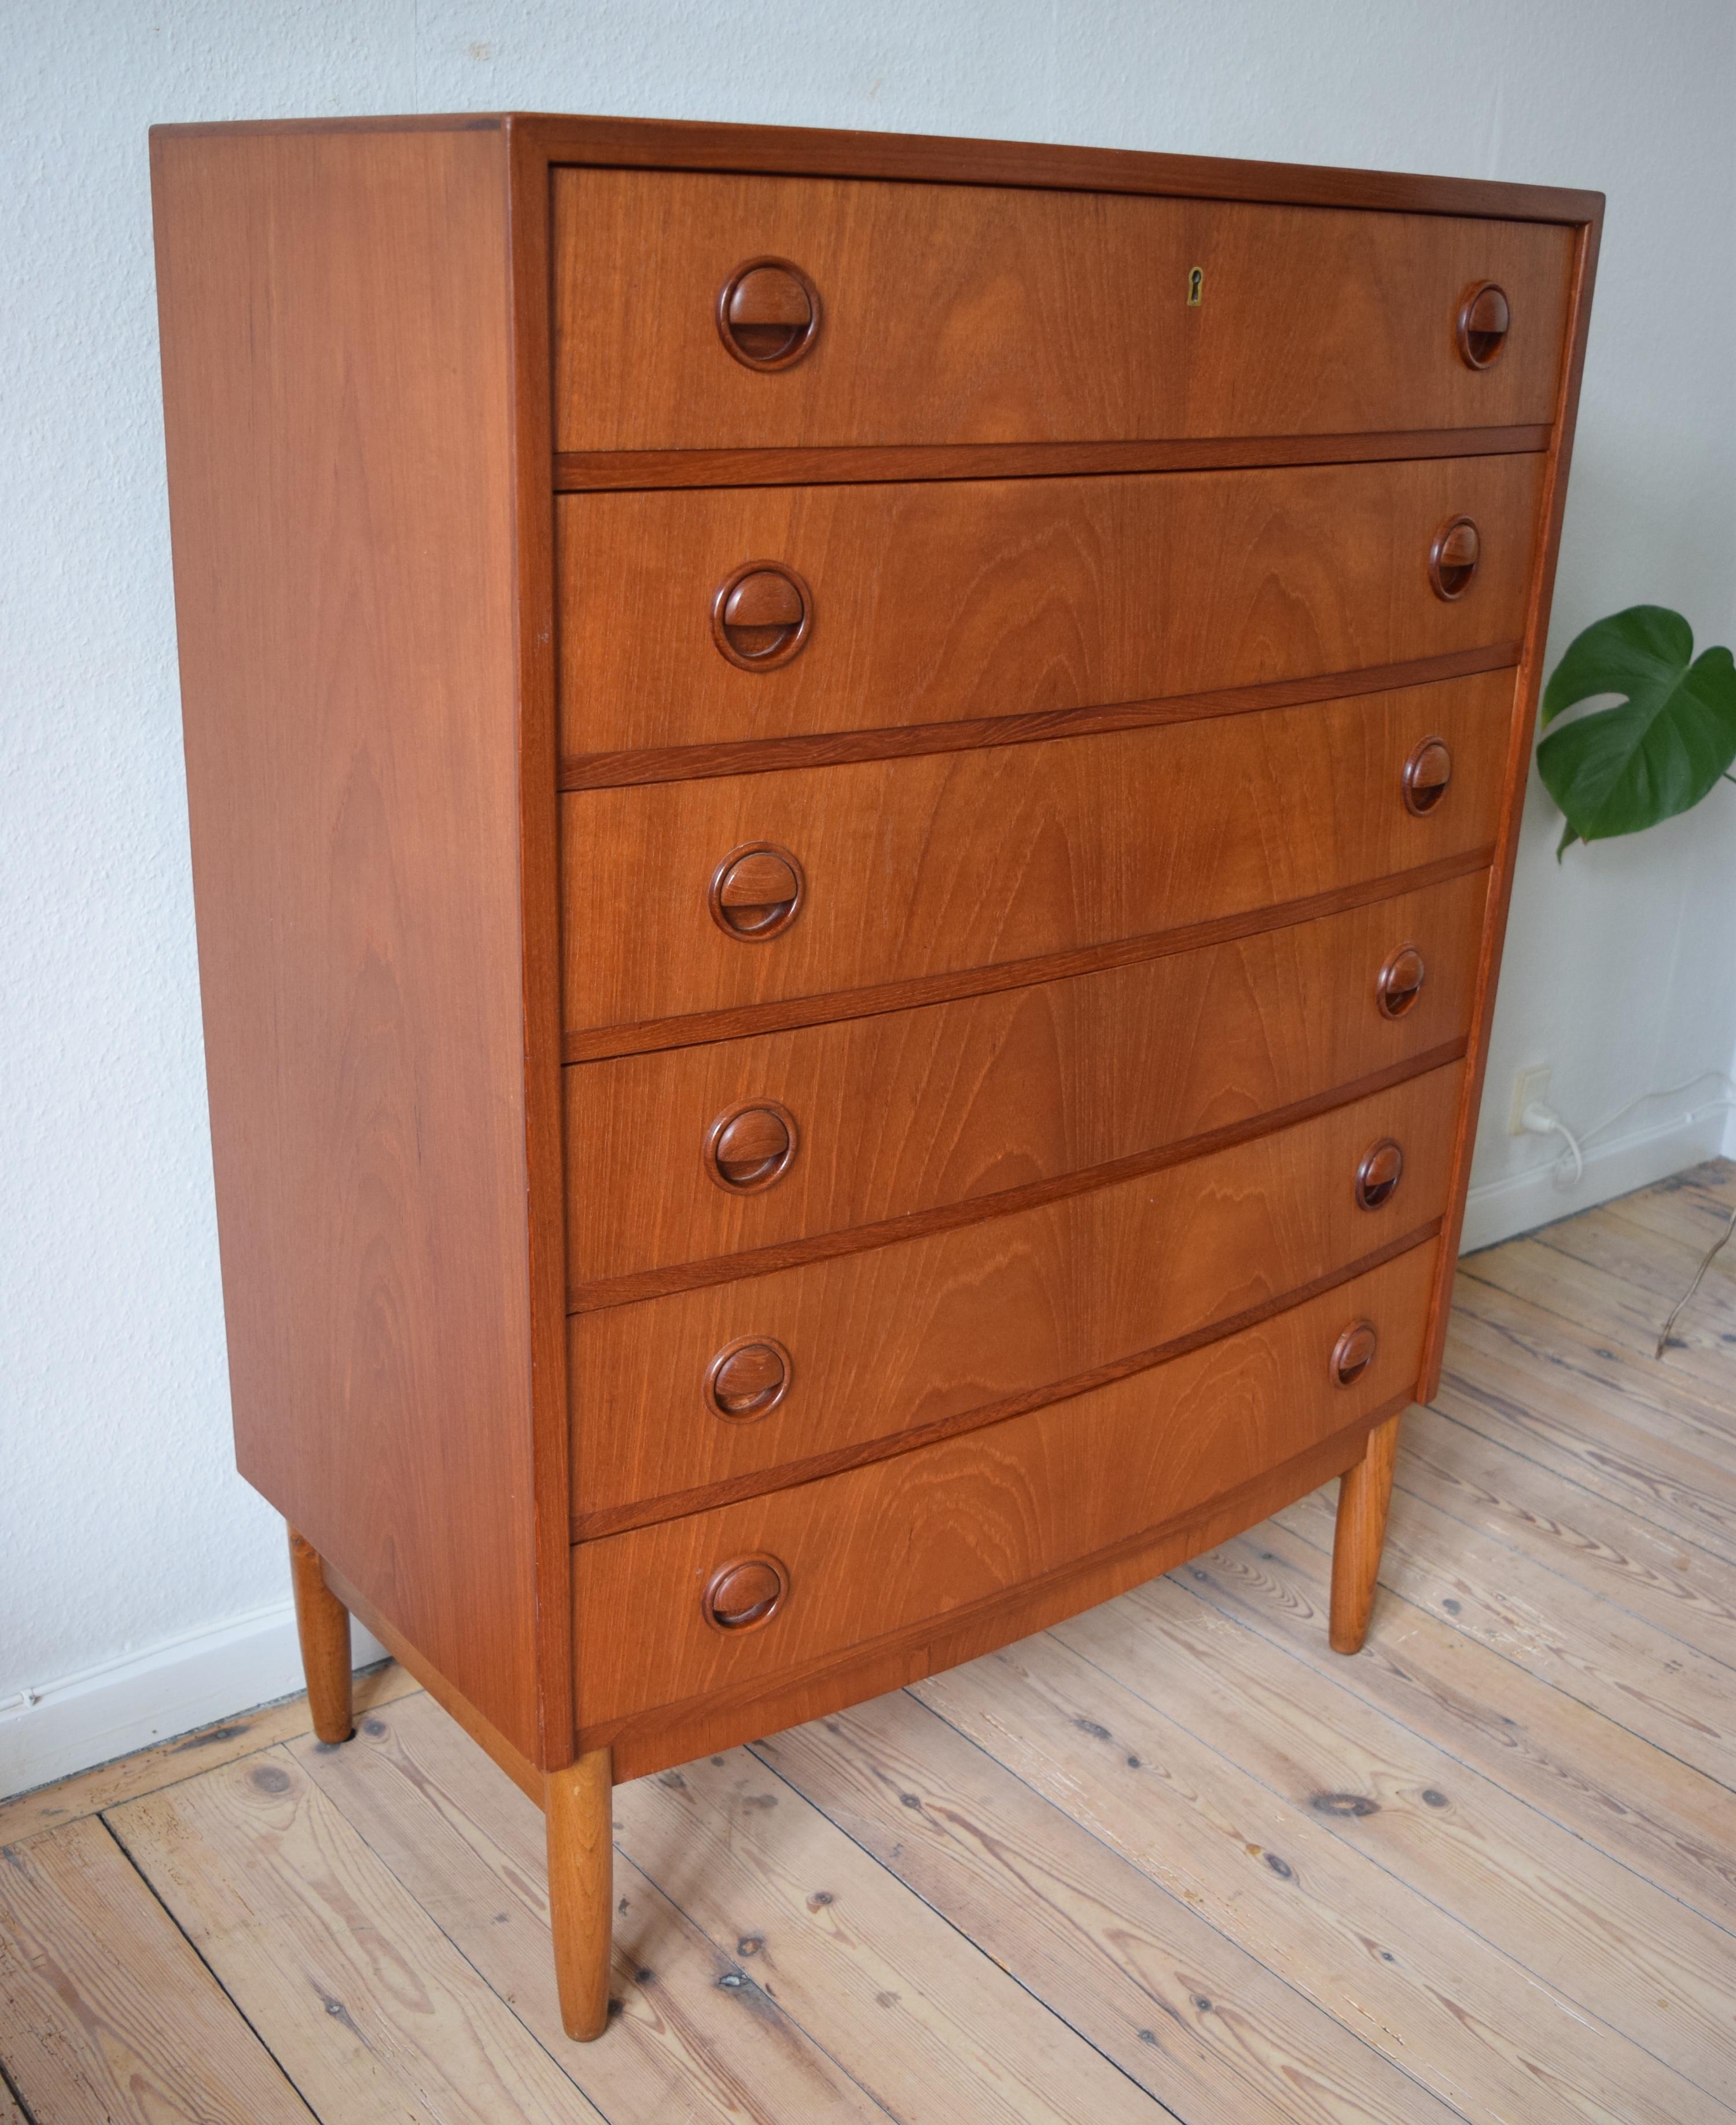 Elegant, large chest of drawers designed by Kai Kristiansen circa 1960. The teak chest sits on top of an oak frame and features a slightly bowed front, round drawer pulls and a lockable top drawer.
 